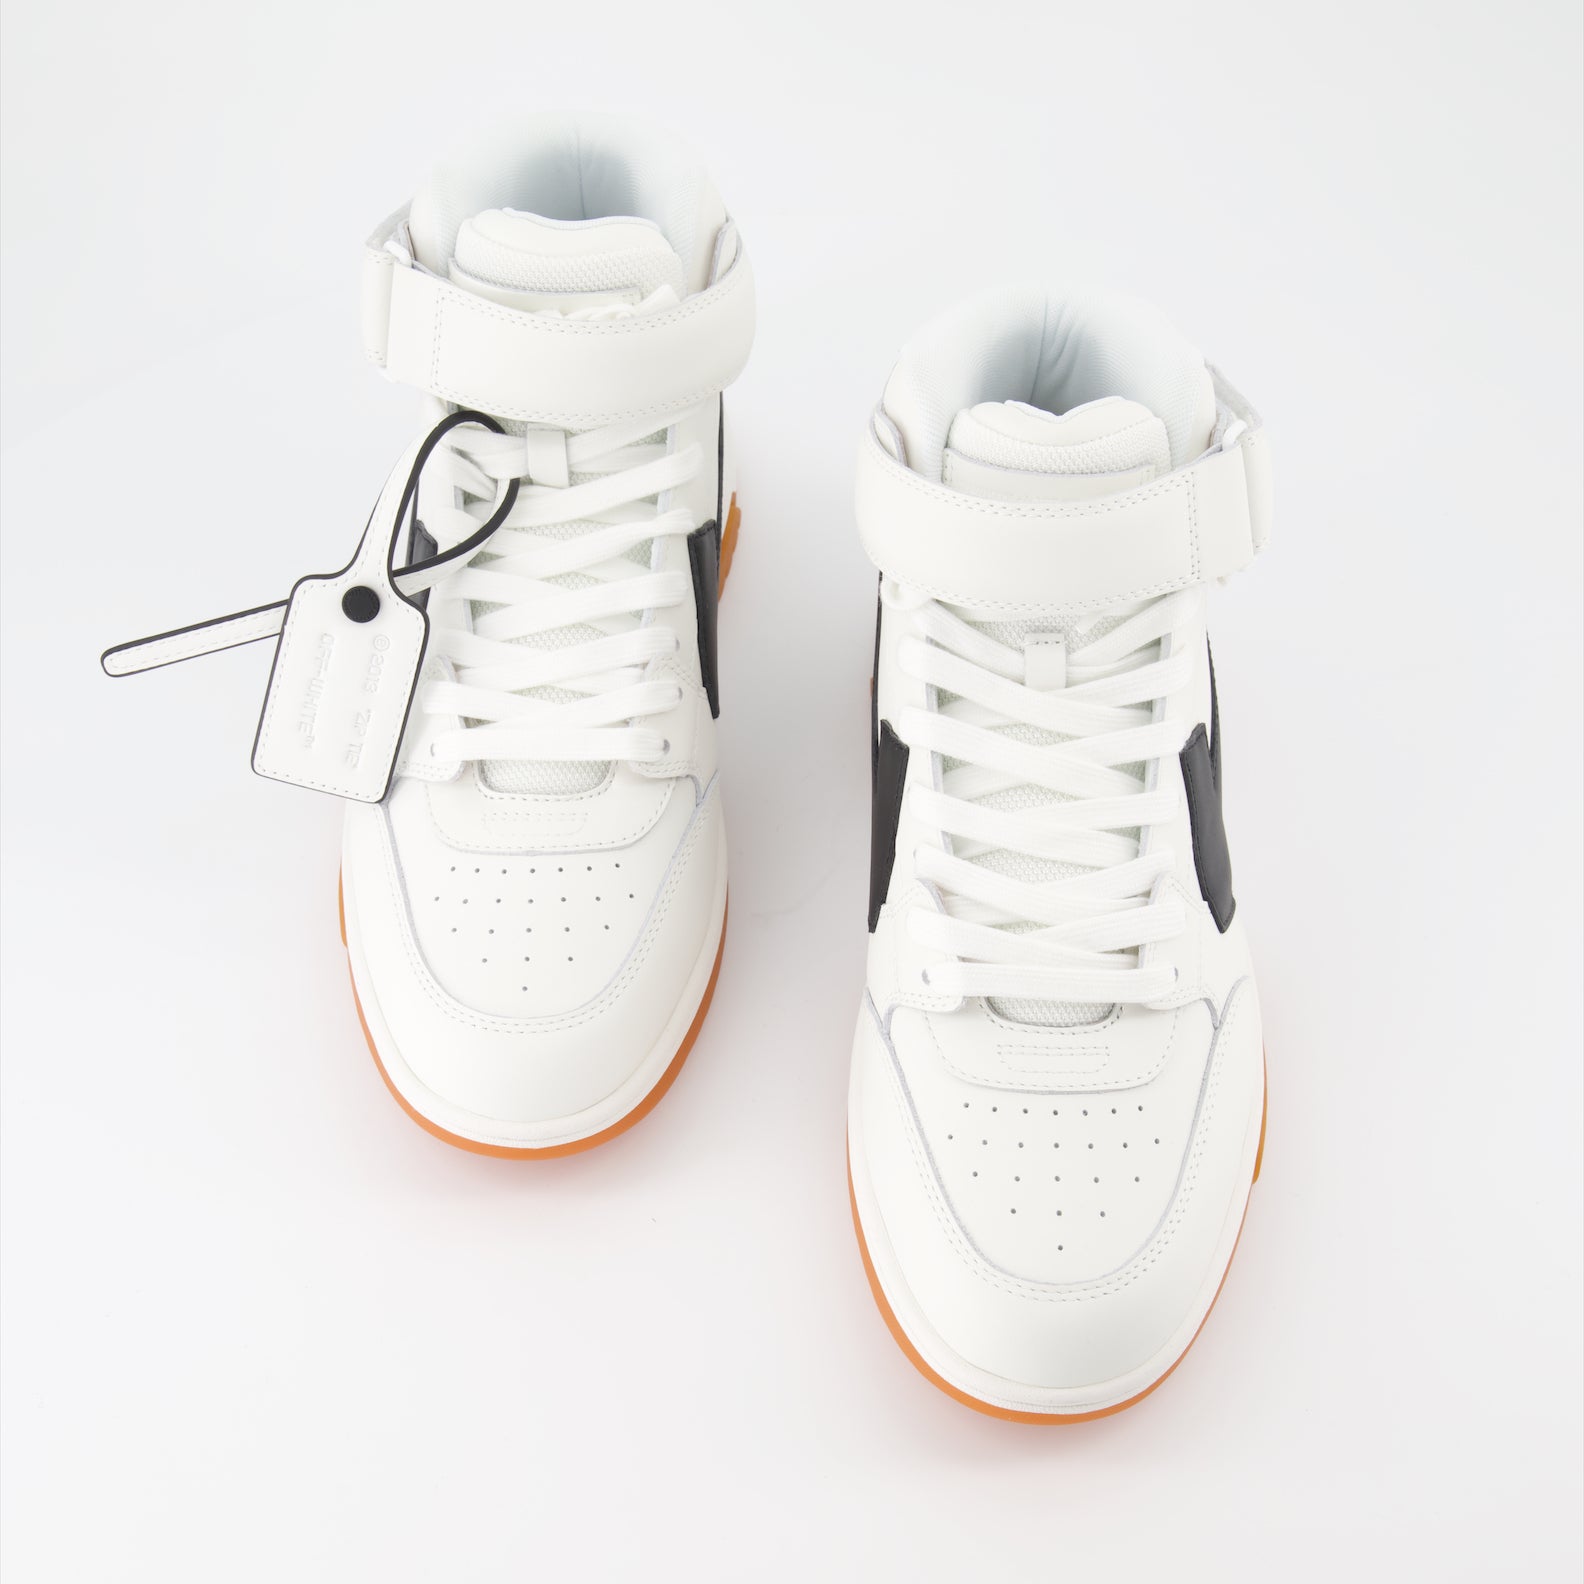 Out Of Office high-top sneakers